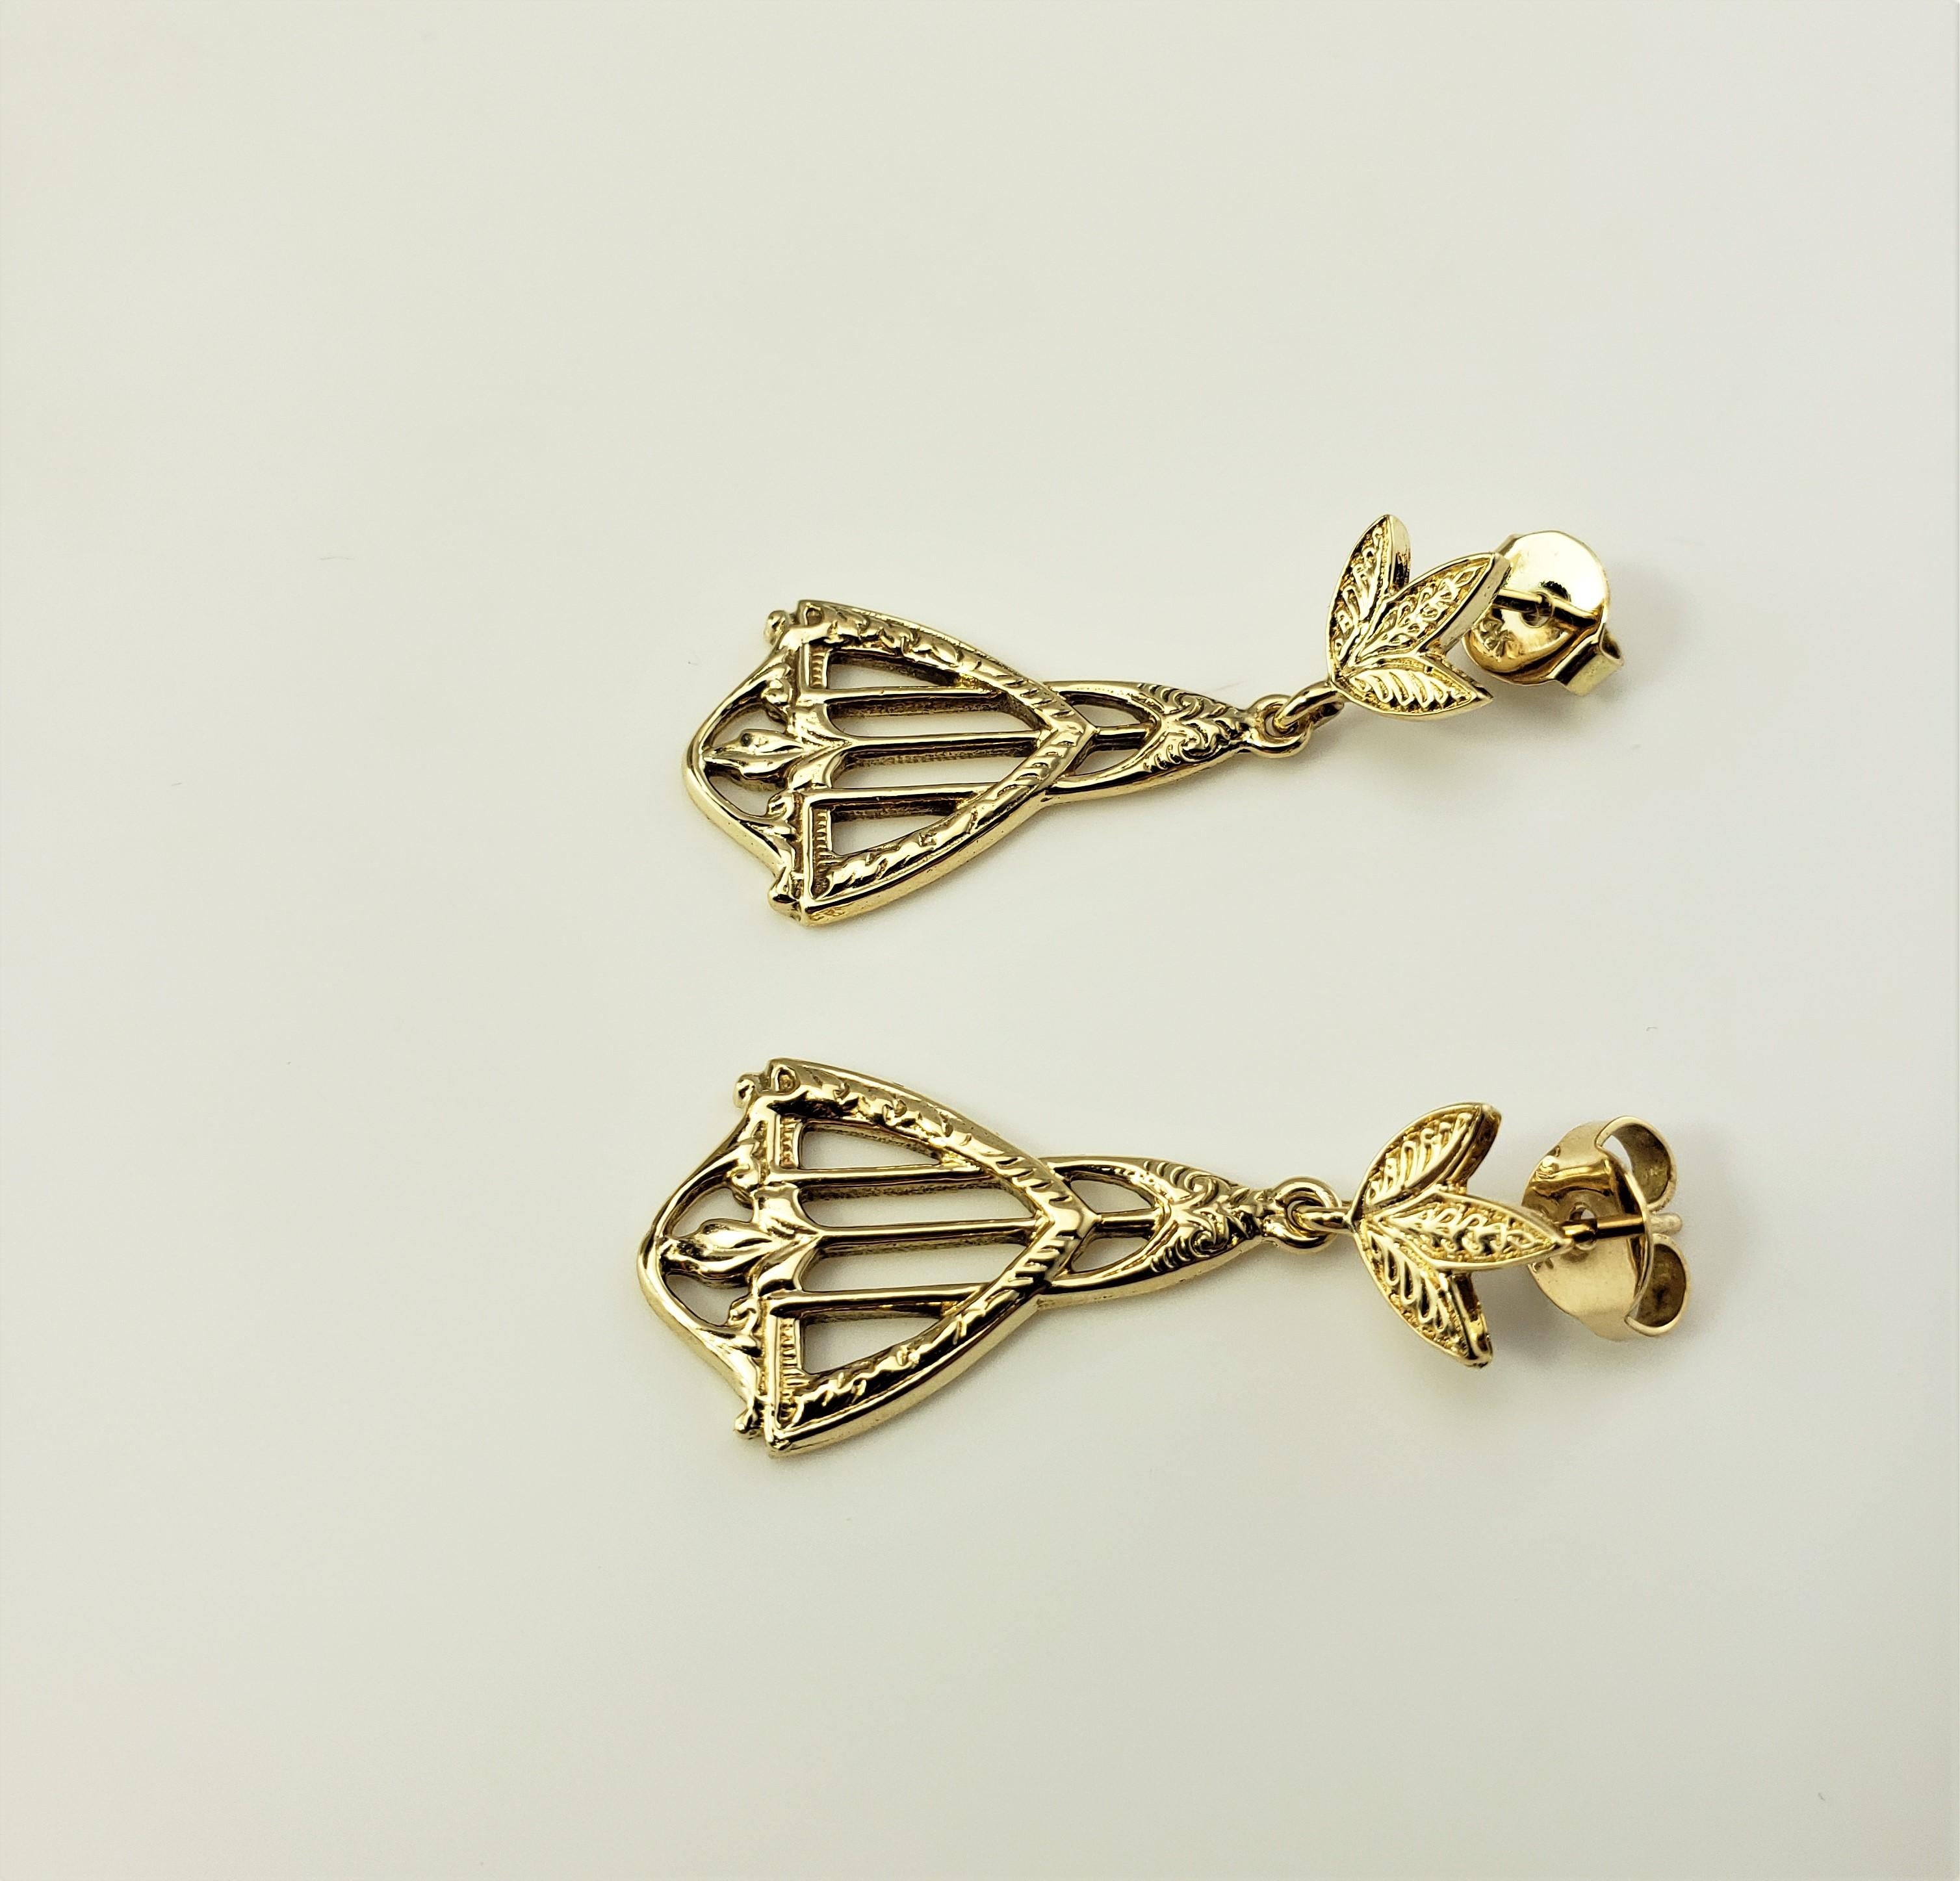 14 Karat Yellow Gold Dangle Earrings-

These lovely dangling earrings are crafted in beautifully detailed 14K yellow gold.  Push back closures.

Size:  32 mm  x 14 mm

Weight:  3.2 dwt. /  5.0 gr.

Stamped: 14K

Very good condition, professionally